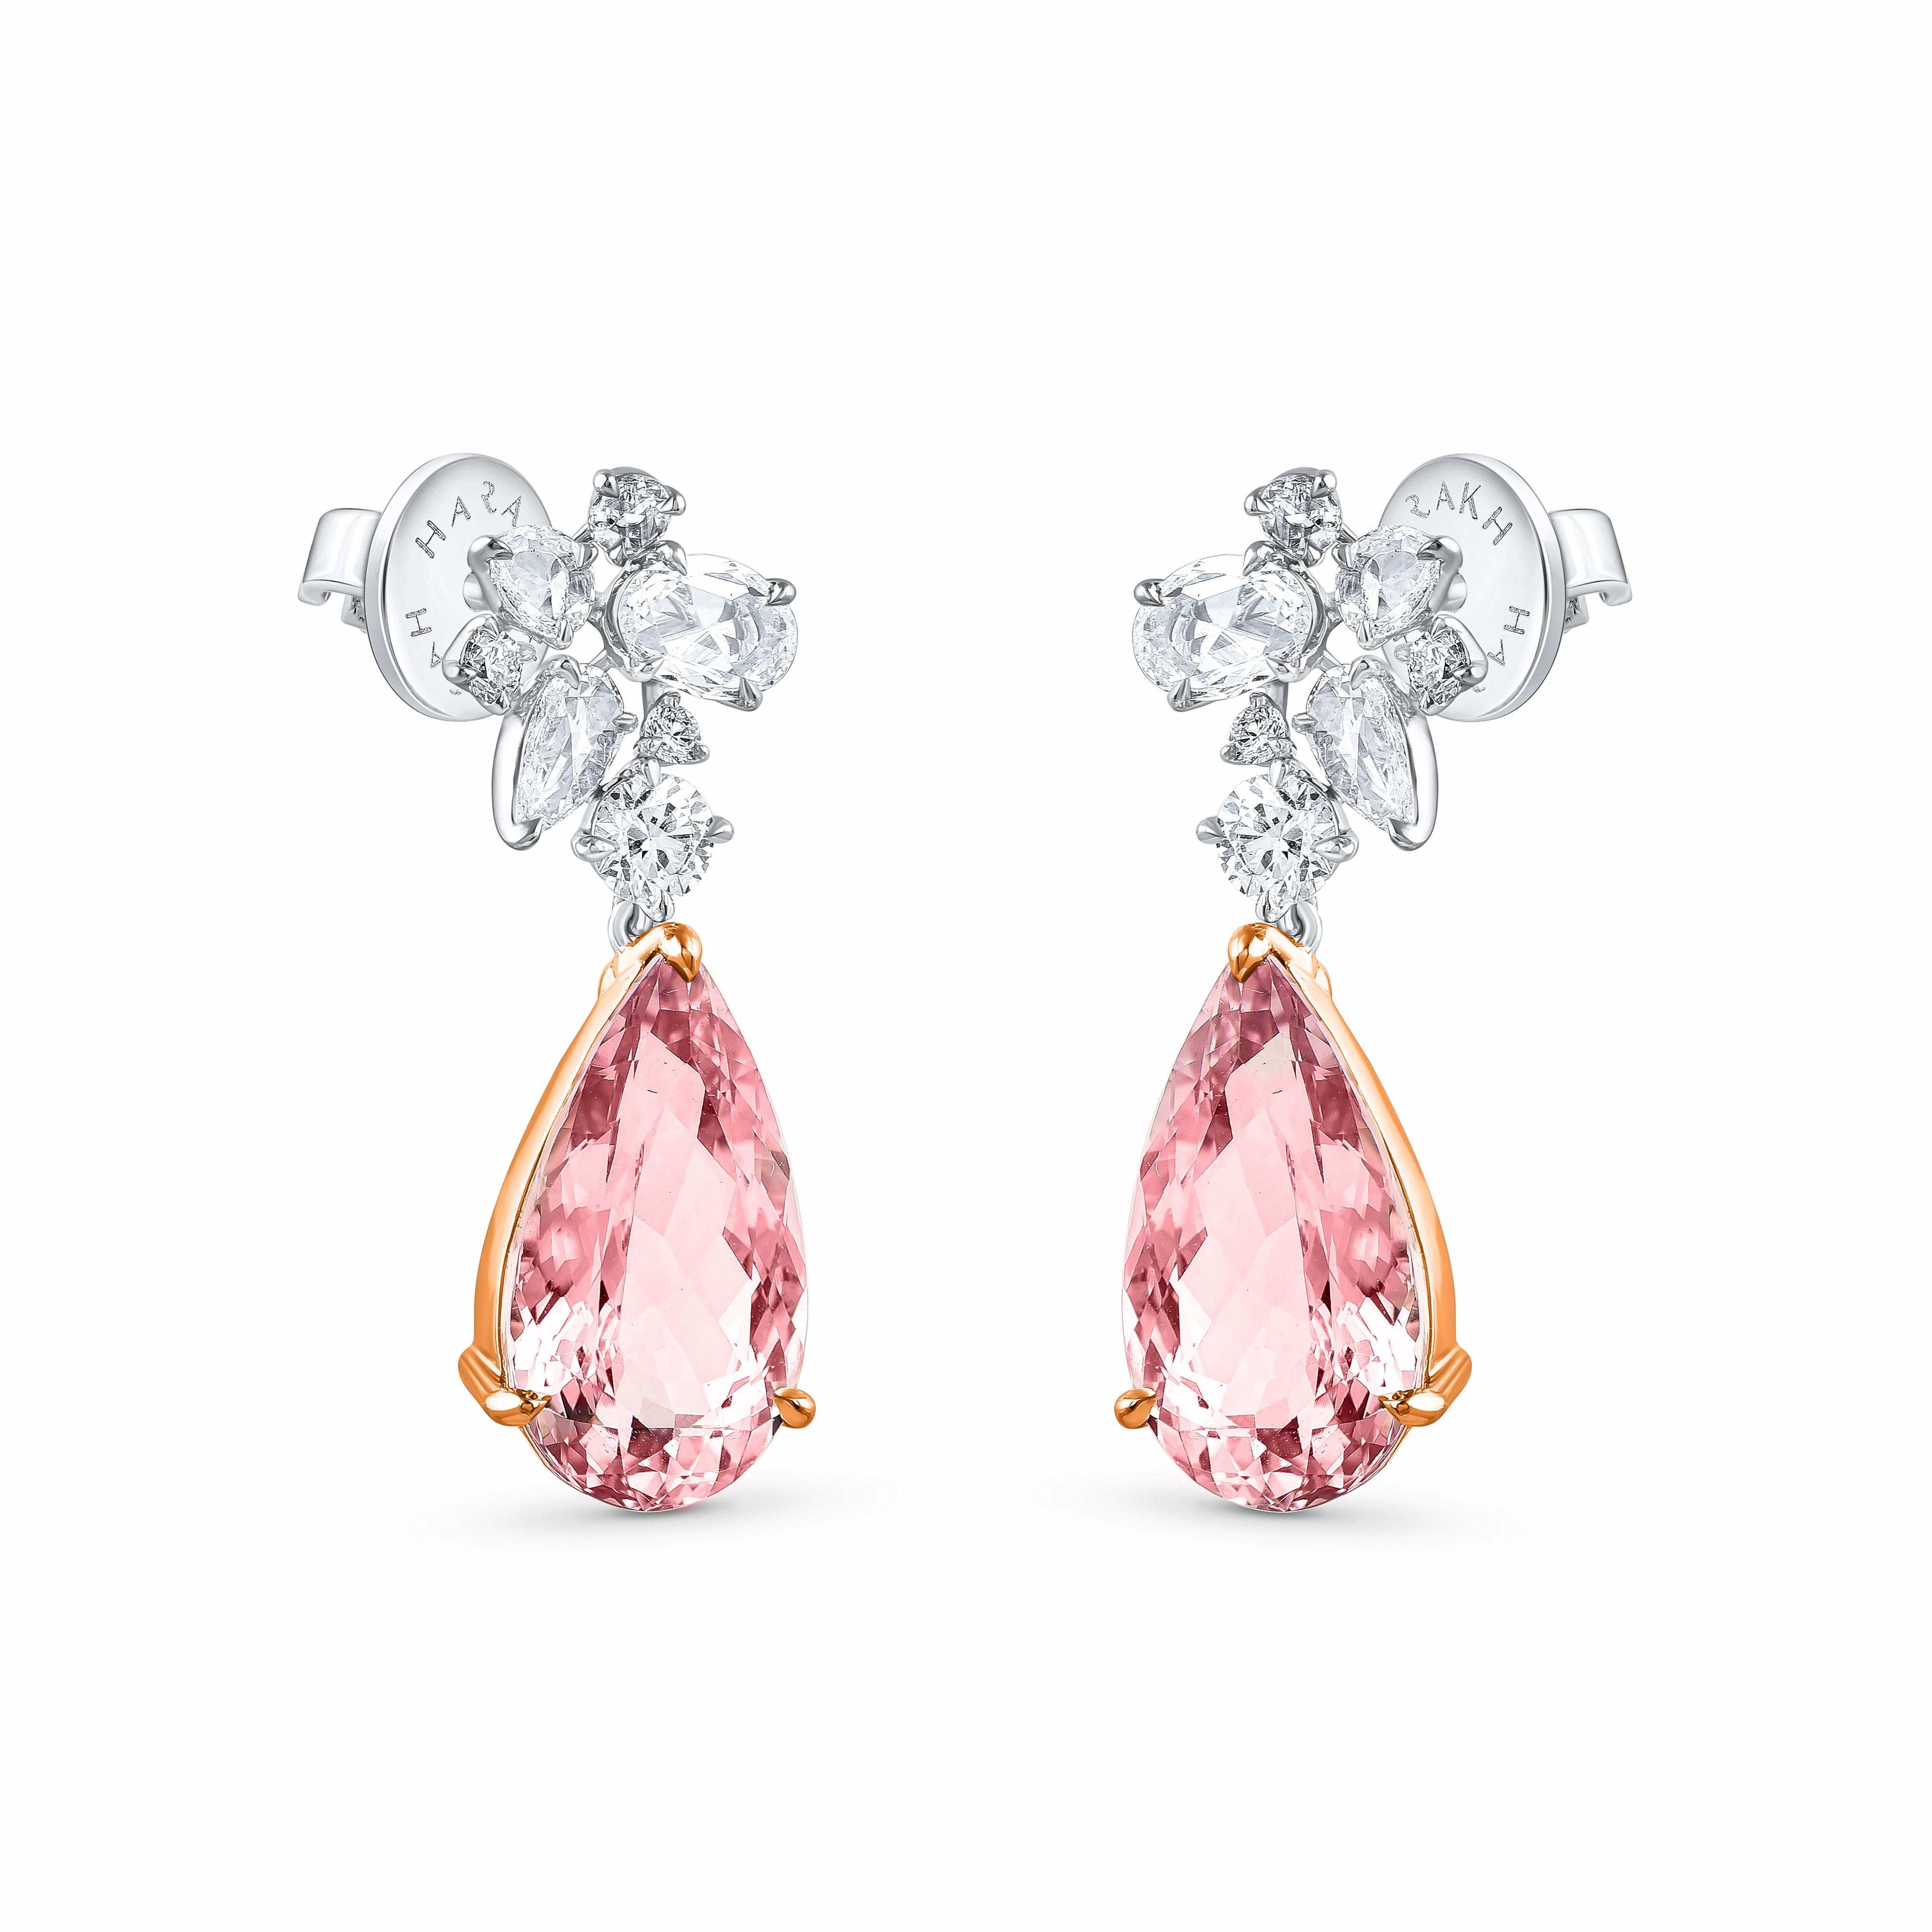 Inspired by the JOY of experiencing a gushing waterfall, these exquisite and elegant dangling earrings from the Cascade Collection are studded with 6 brilliant round cut diamonds, 2 rose-cut marquise, 2 rose-cut pear, 2 rose-cut round, 2 rose-cut